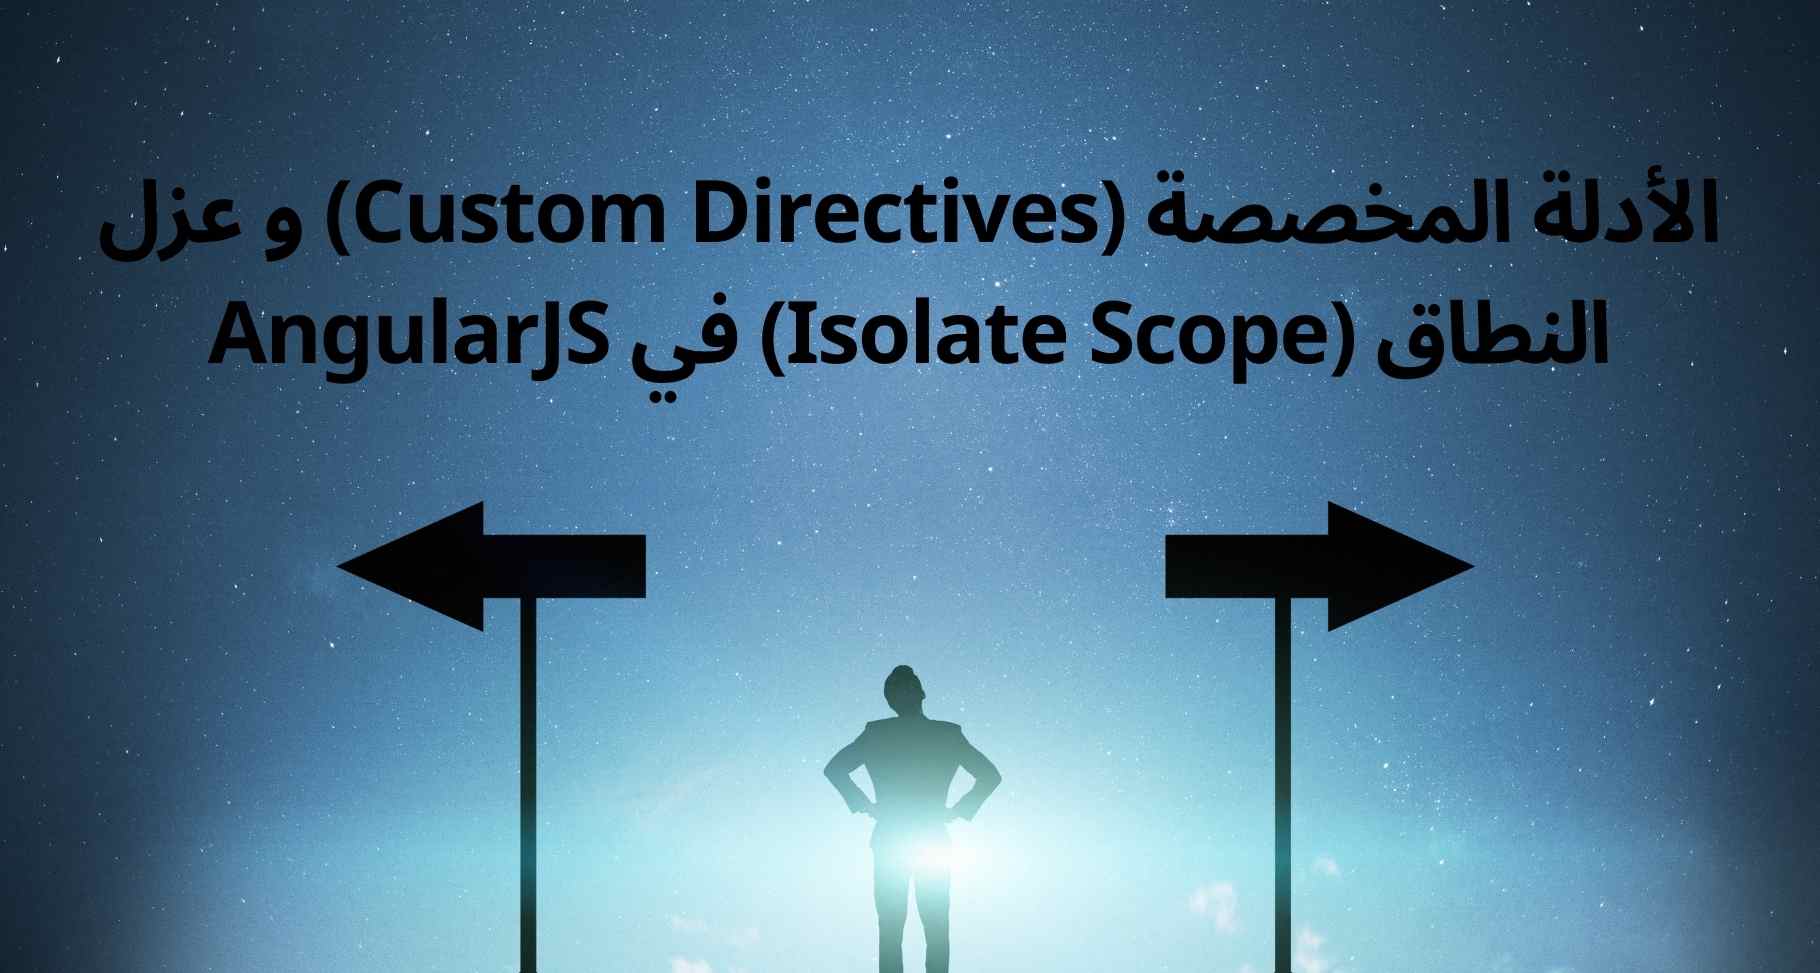 custom-directives-and-isolate-scope-in-angularjs